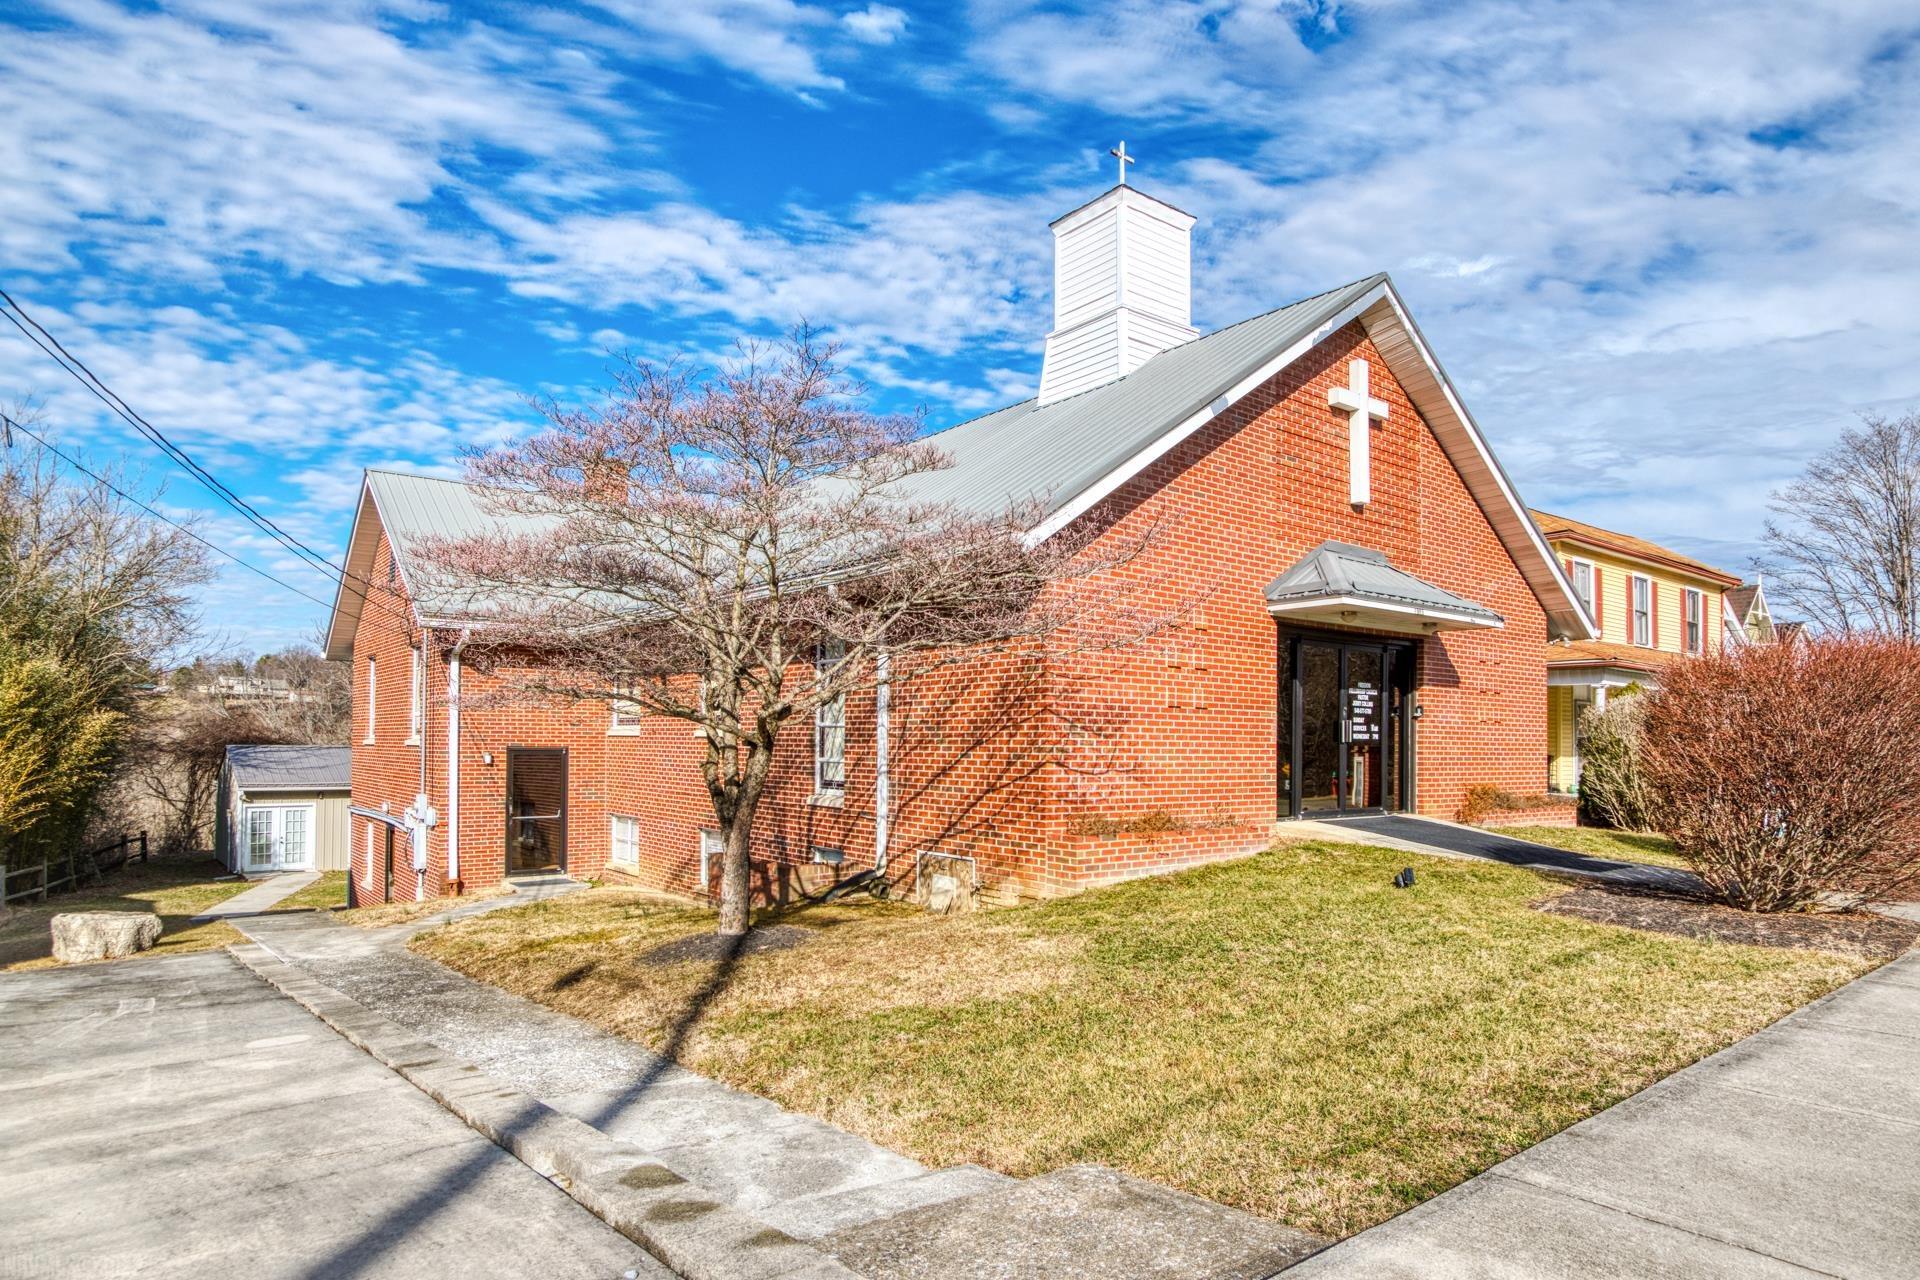 This is a beautiful church located in central Radford very close to Bisset park. The zoning is residential and allows single family use as well as the existing use as a church. There is a detached 800 sq.ft. building with split unit heat pumps.    Financing would need to be an in-bank loan, commercial loan or cash. Government loans will not qualify. This could be a very unique living experience with potential cash flow. huge value for the quality and square footage at this price point. Unlimited possibilities.